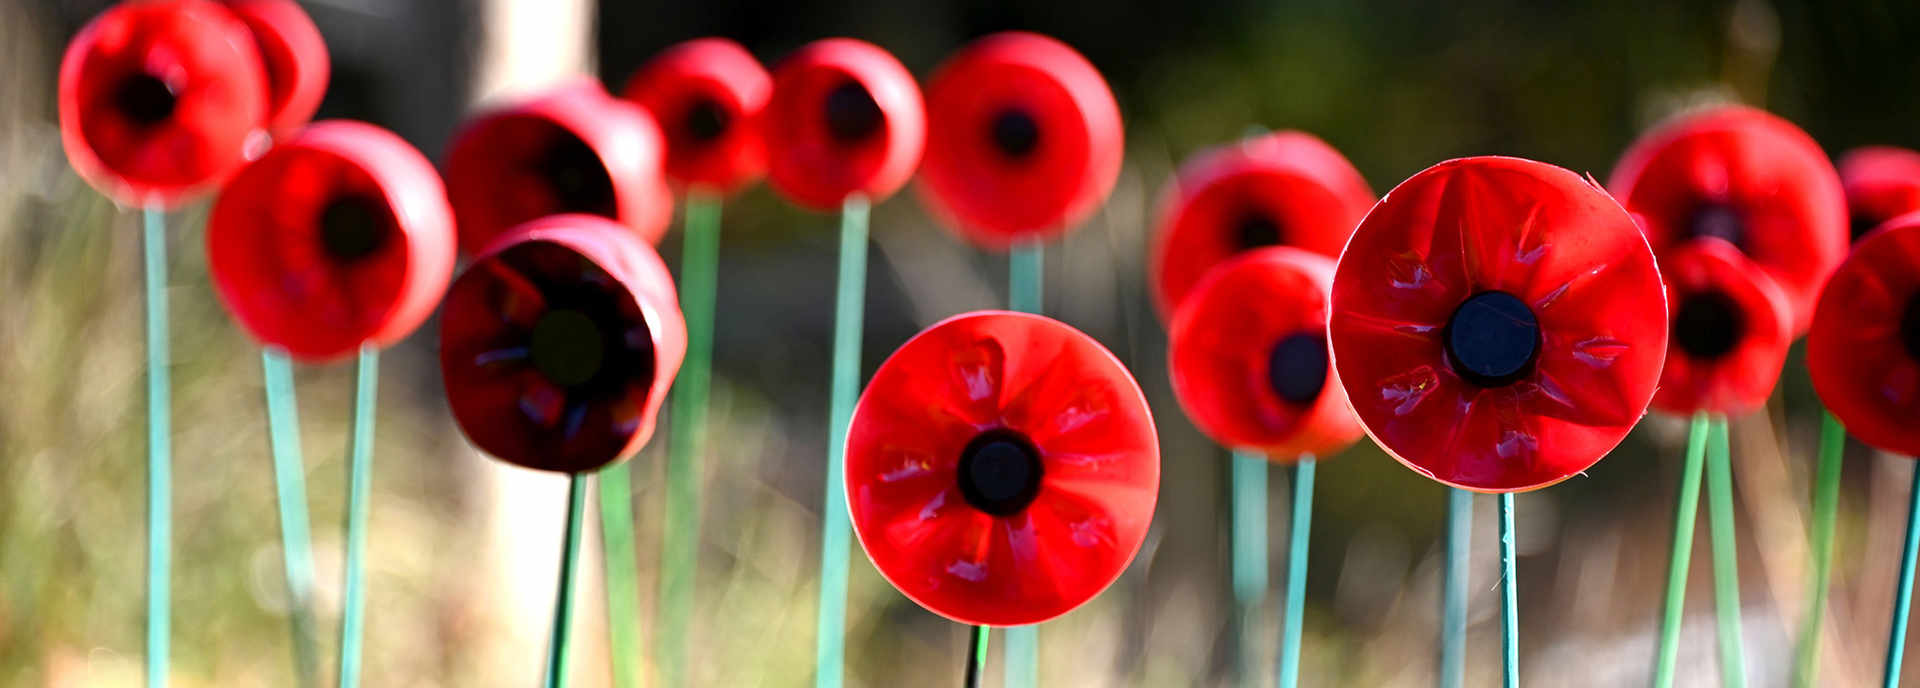 School children mark Remembrance Day - Poppies | News & Insights